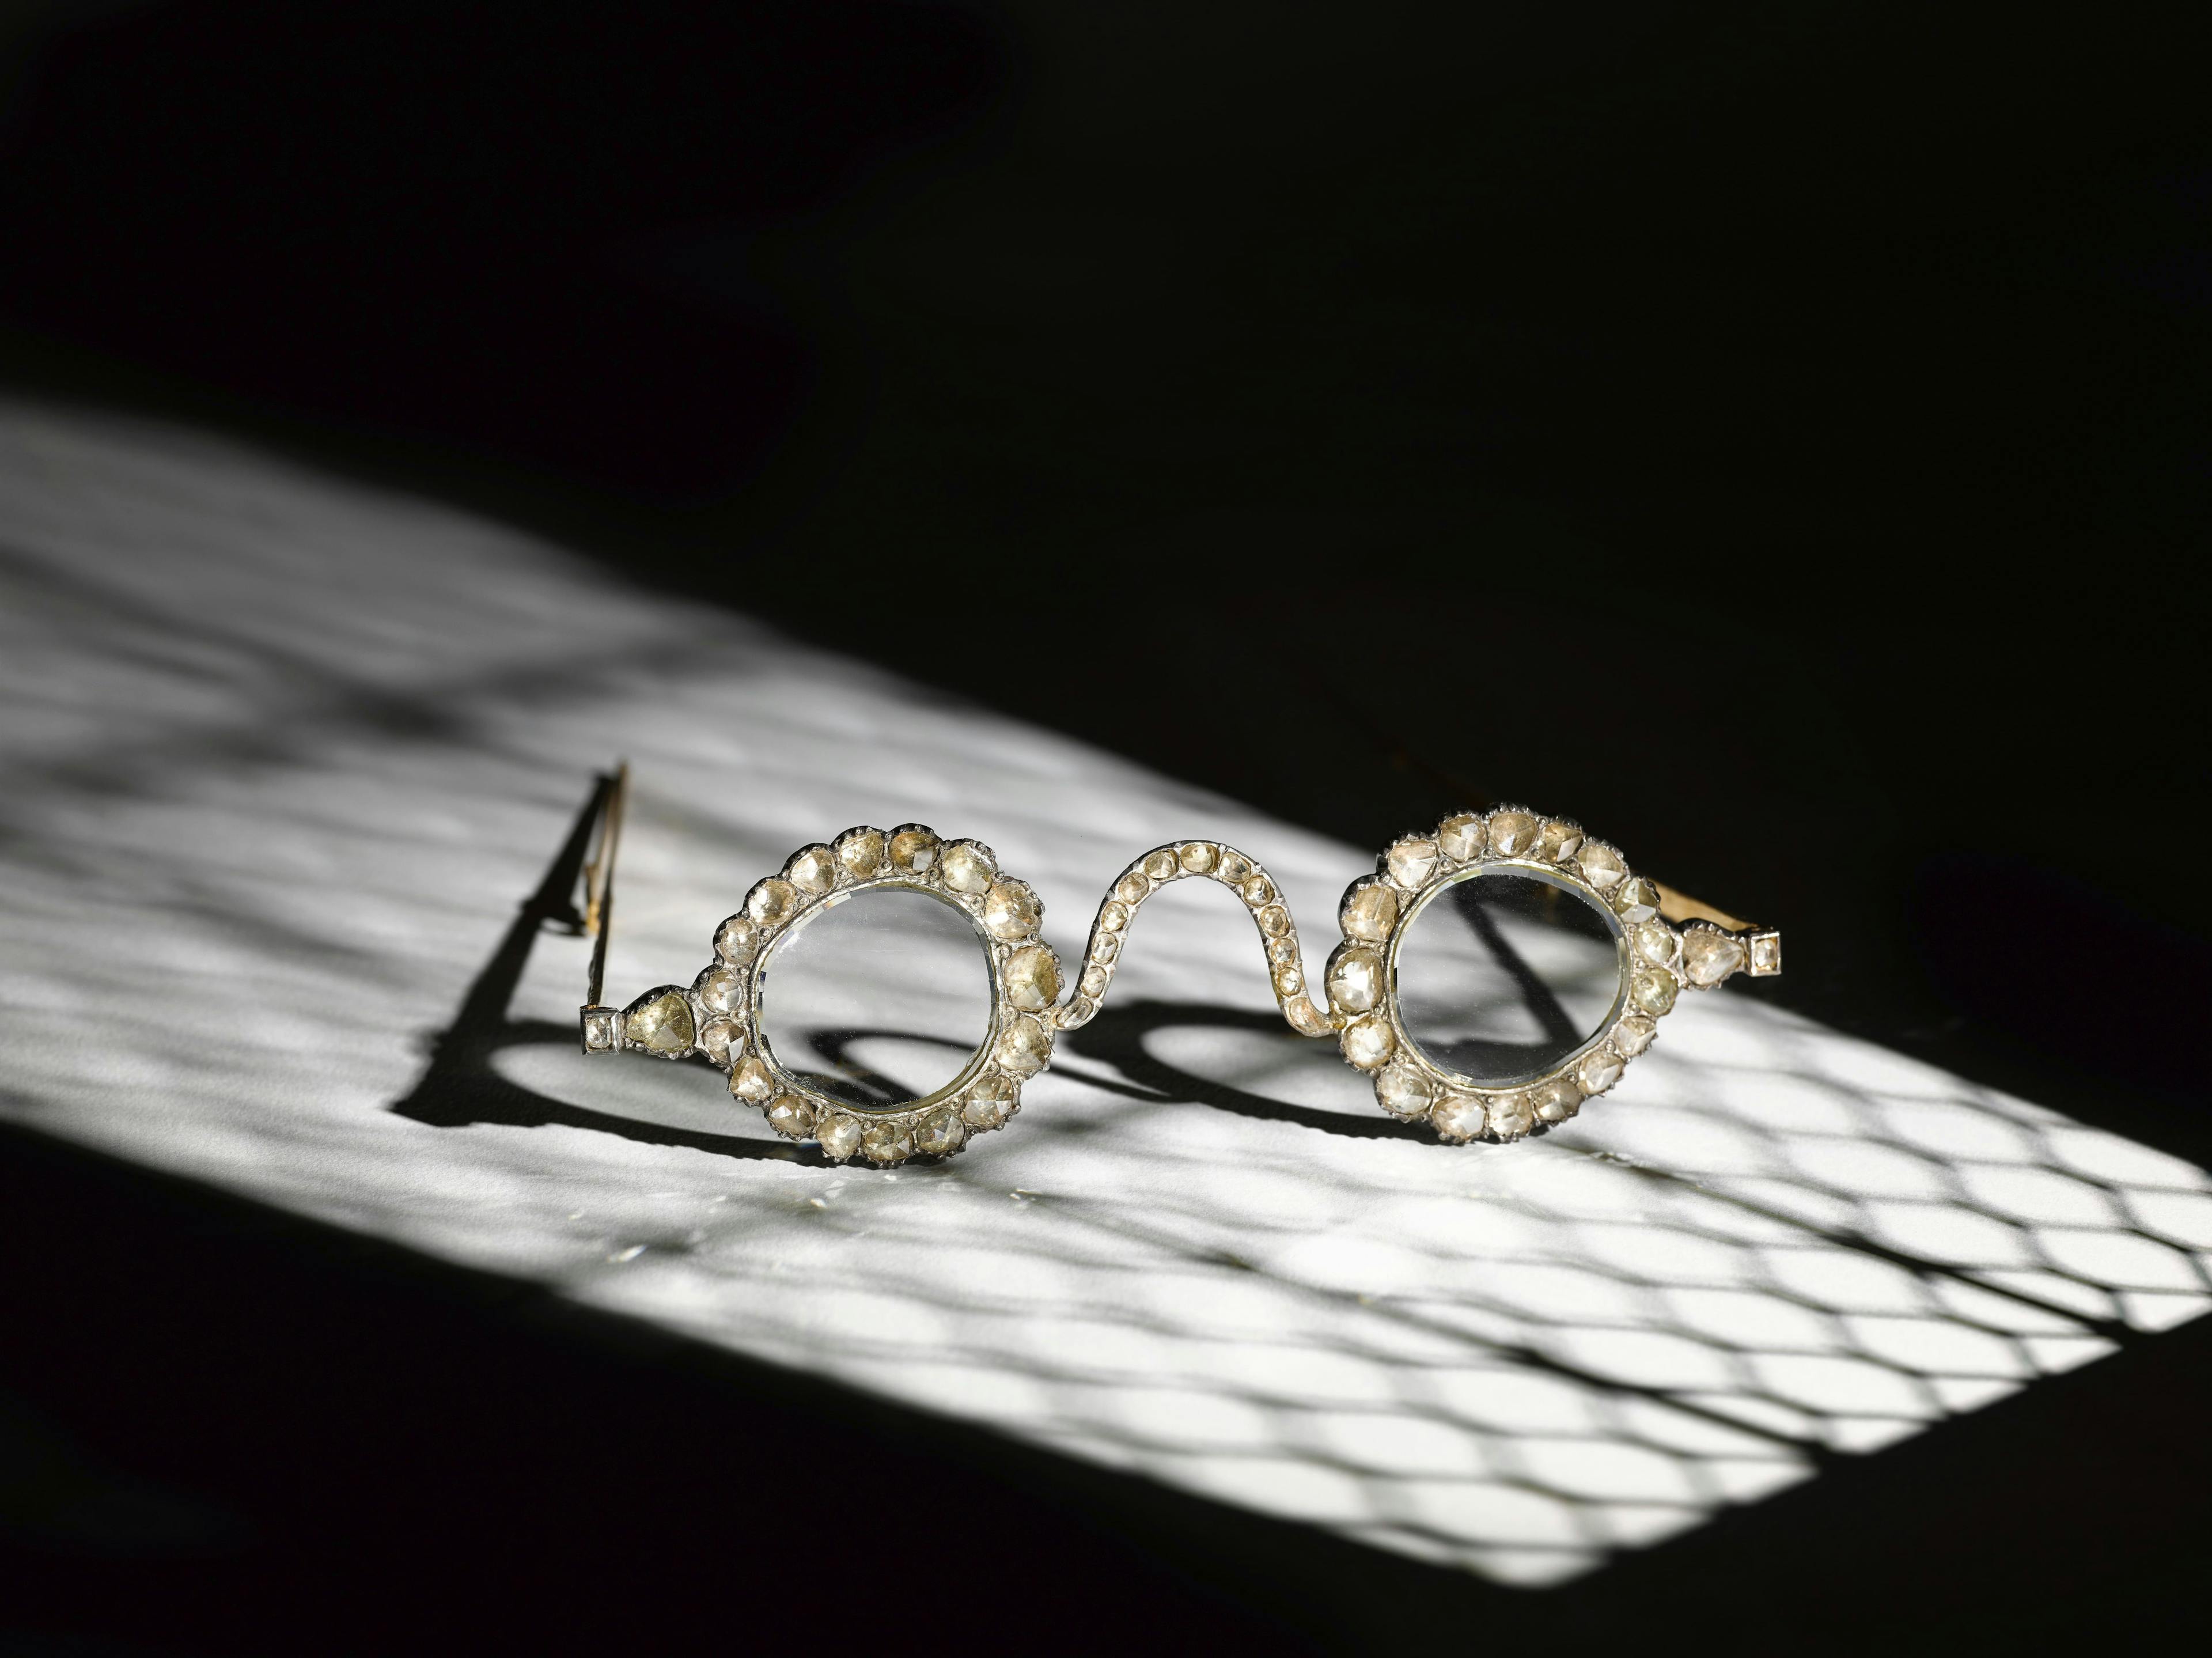 The lenses of the "Halo of Light" eyeglasses are believed to have been cut from a single 200-carat diamond. (Image courtesy of Sotheby's)